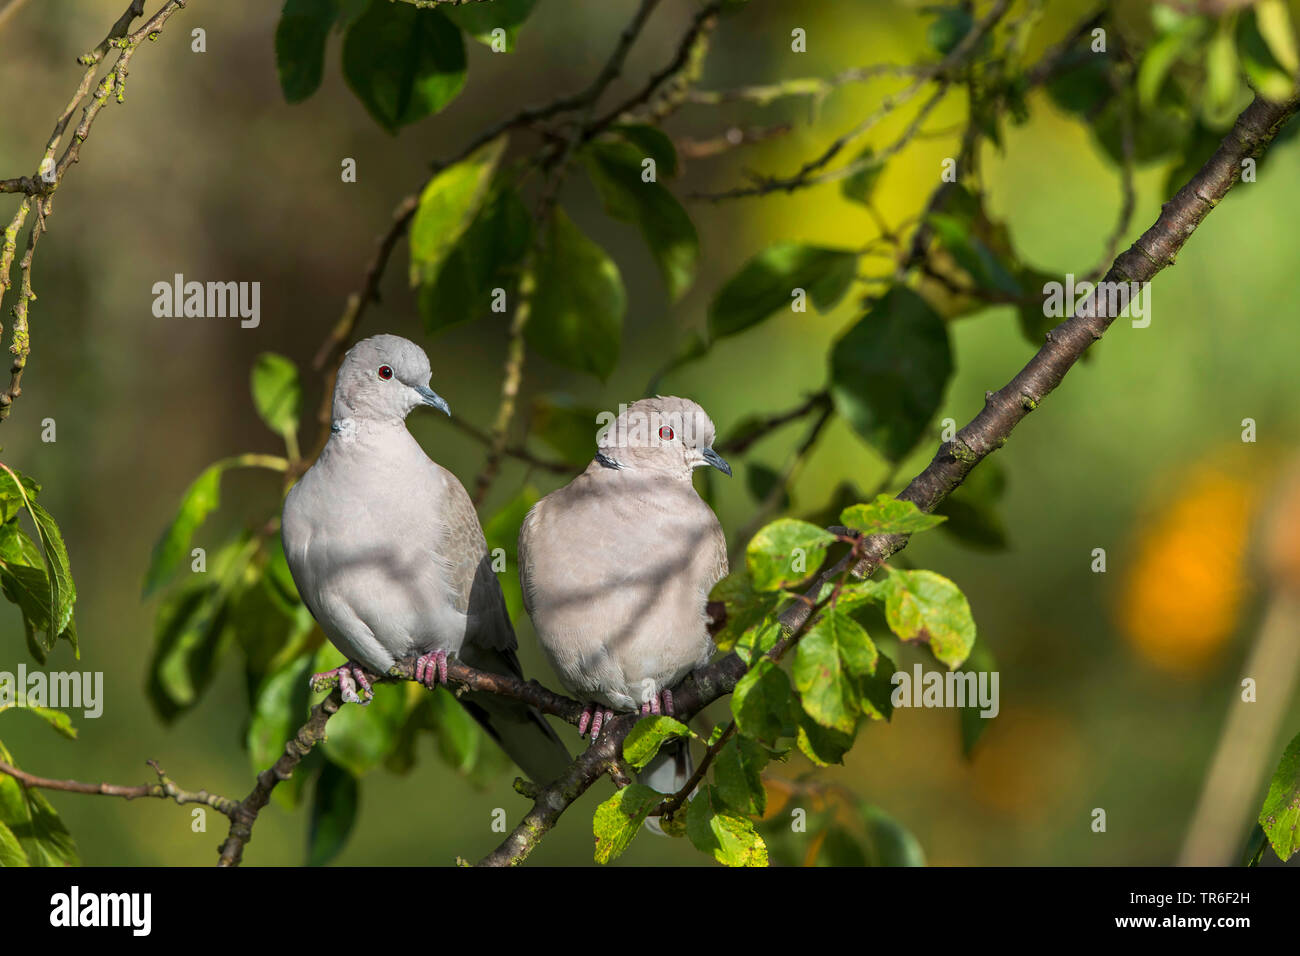 collared dove (Streptopelia decaocto), pair sitting side by side on a branch, Germany, Mecklenburg-Western Pomerania Stock Photo